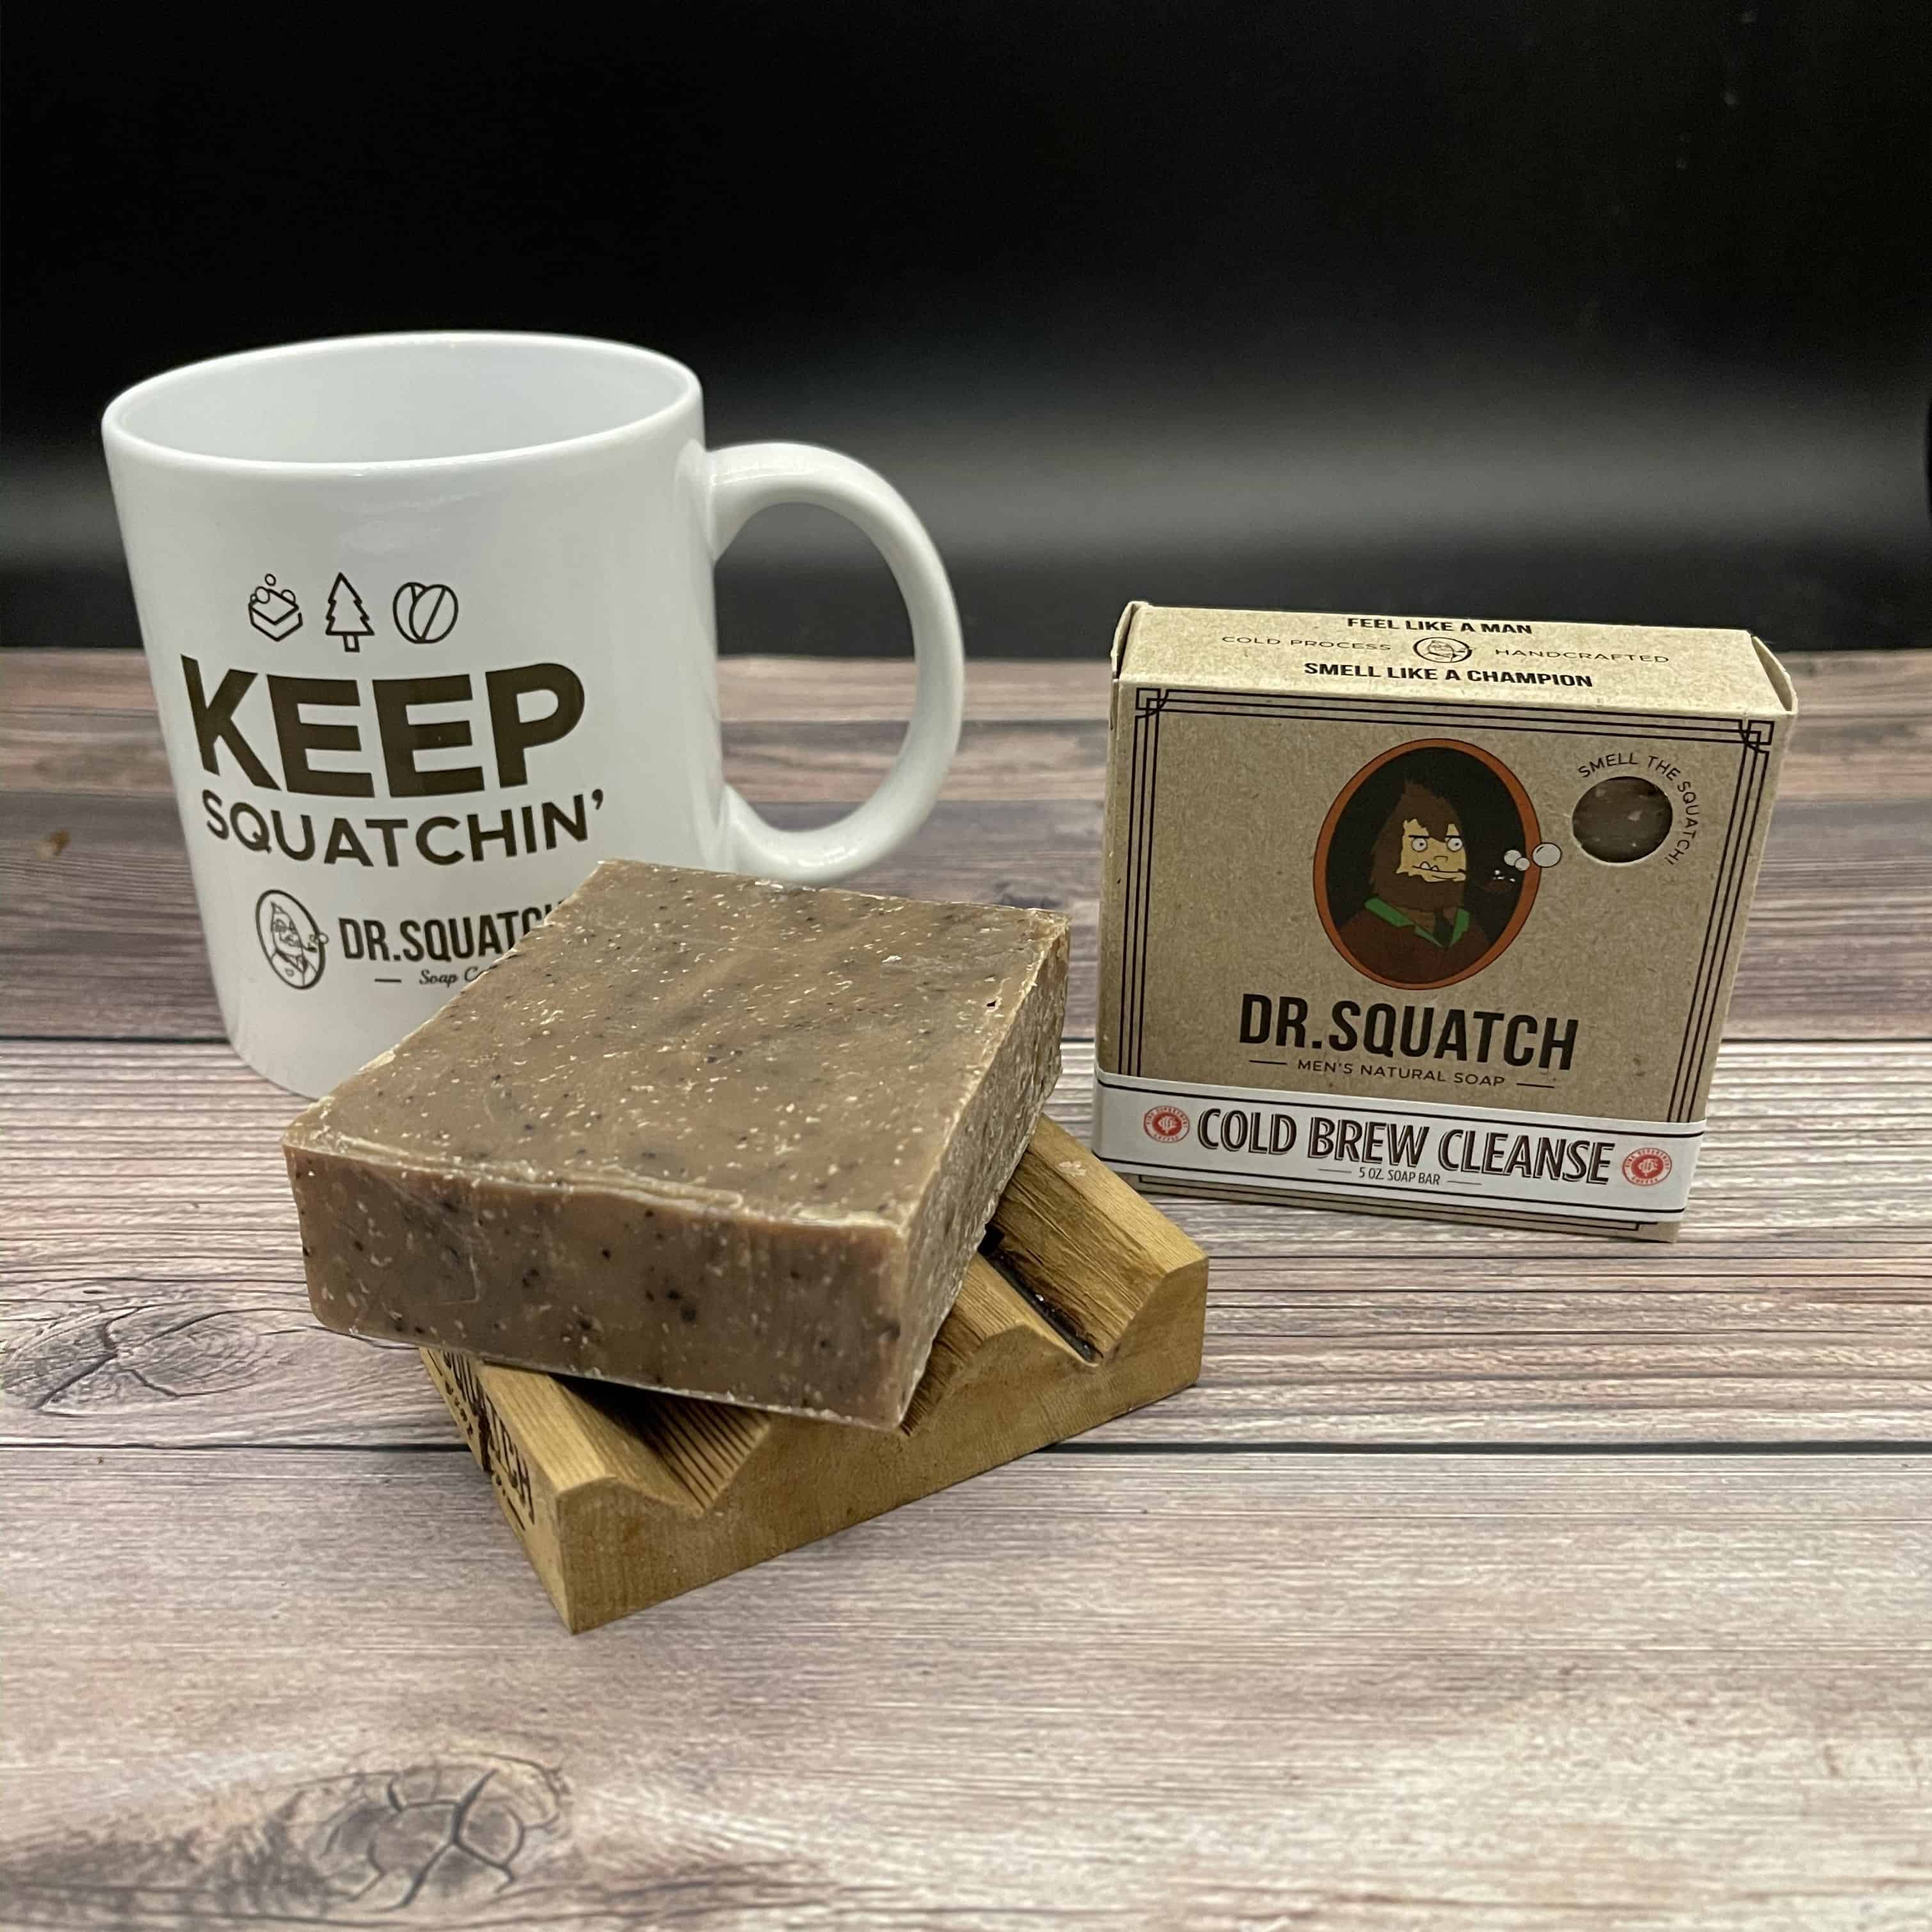 Cold Brew Cleanse - Dr. Squatch Soap Scents